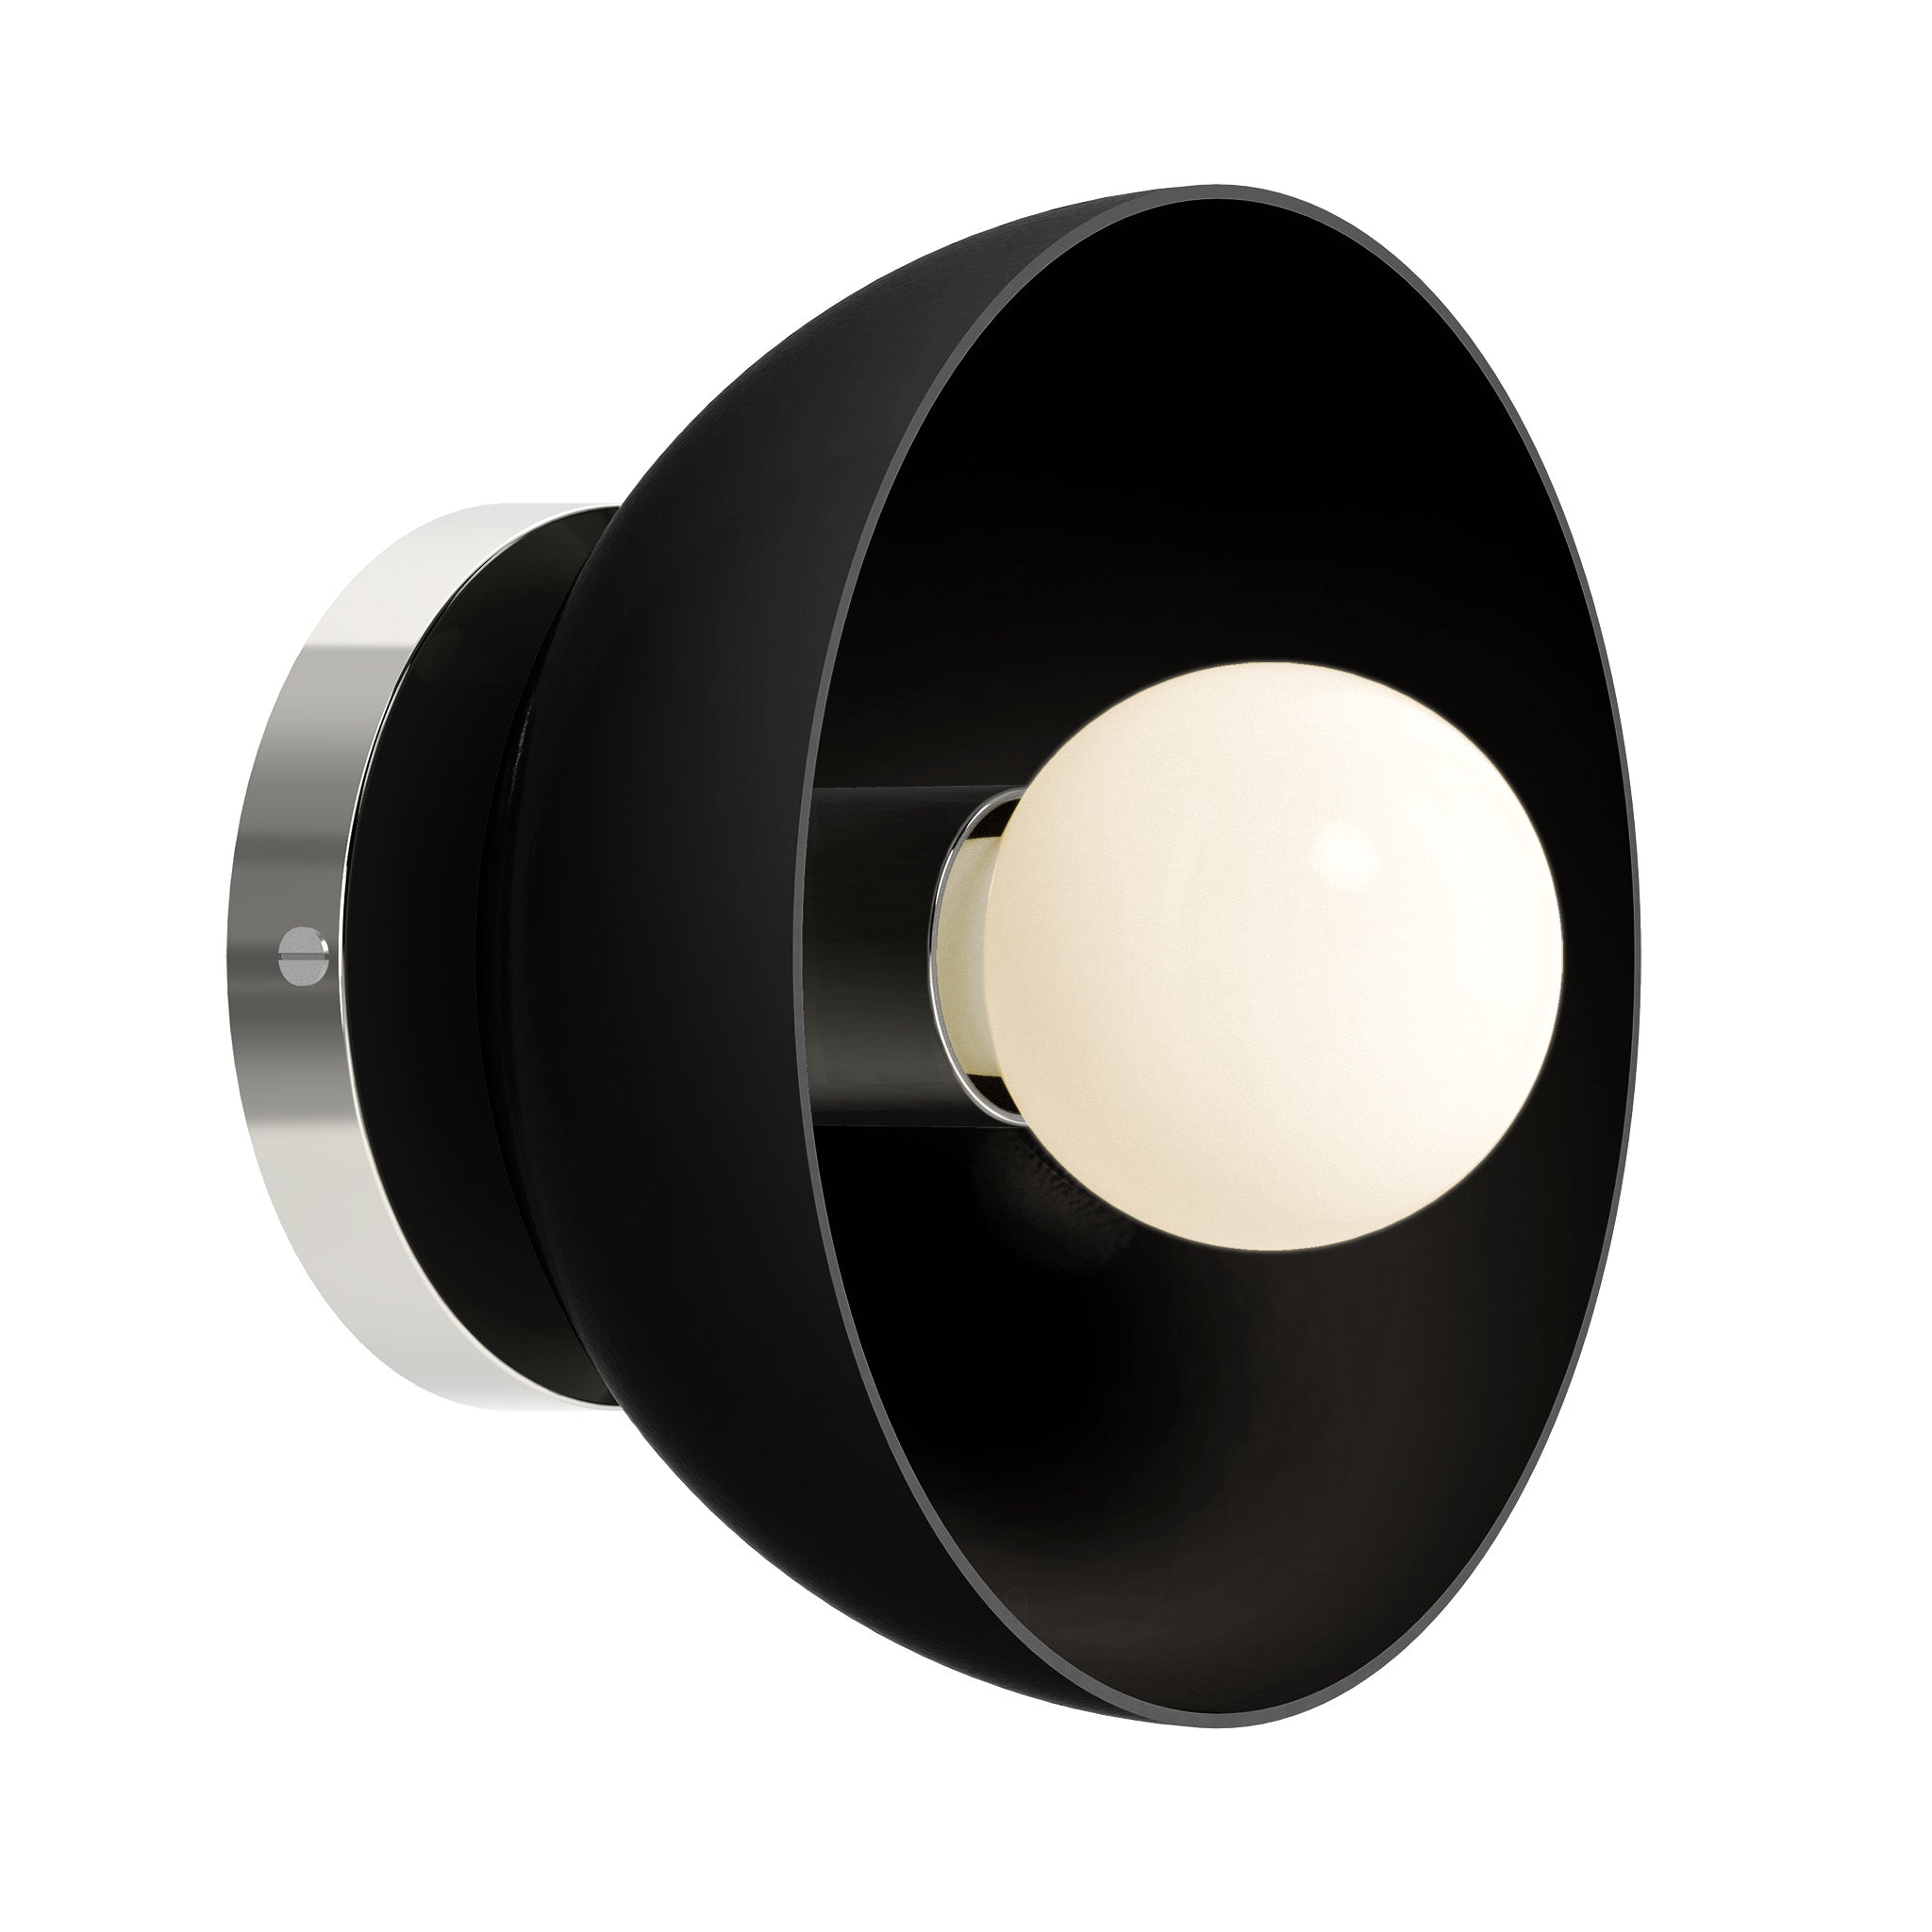 Nickel and black color Hemi sconce 8" Dutton Brown lighting